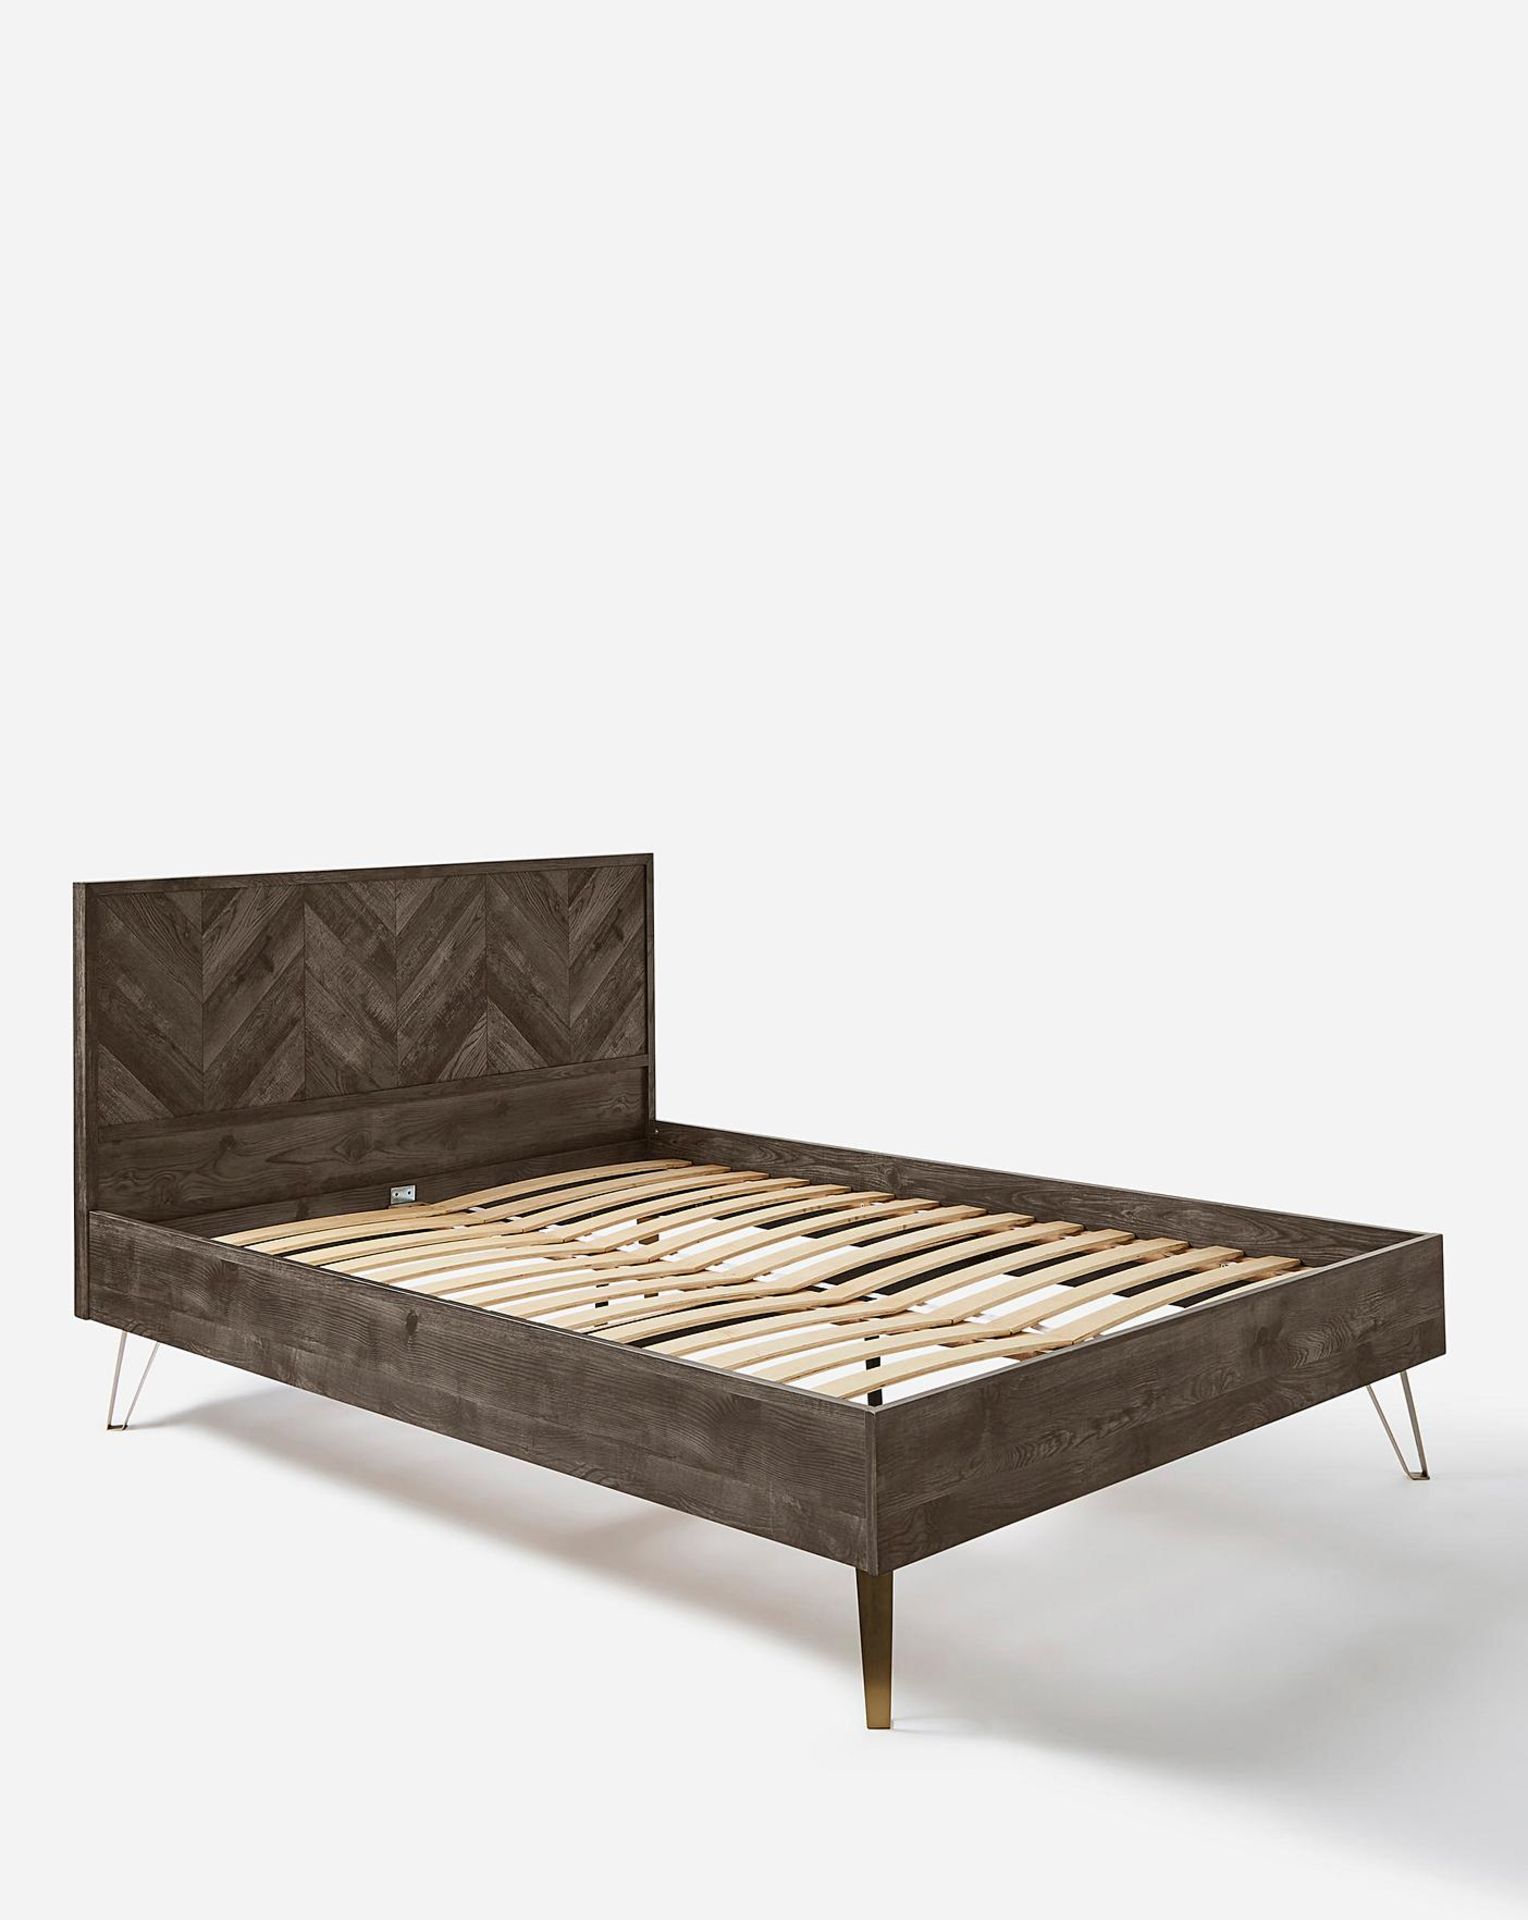 BRAND NEW JOANNA HOPE Coco DOUBLE Bed Frame. DARK WALNUT. RRP £399 EACH. Part of the Joanna Hope - Image 2 of 2